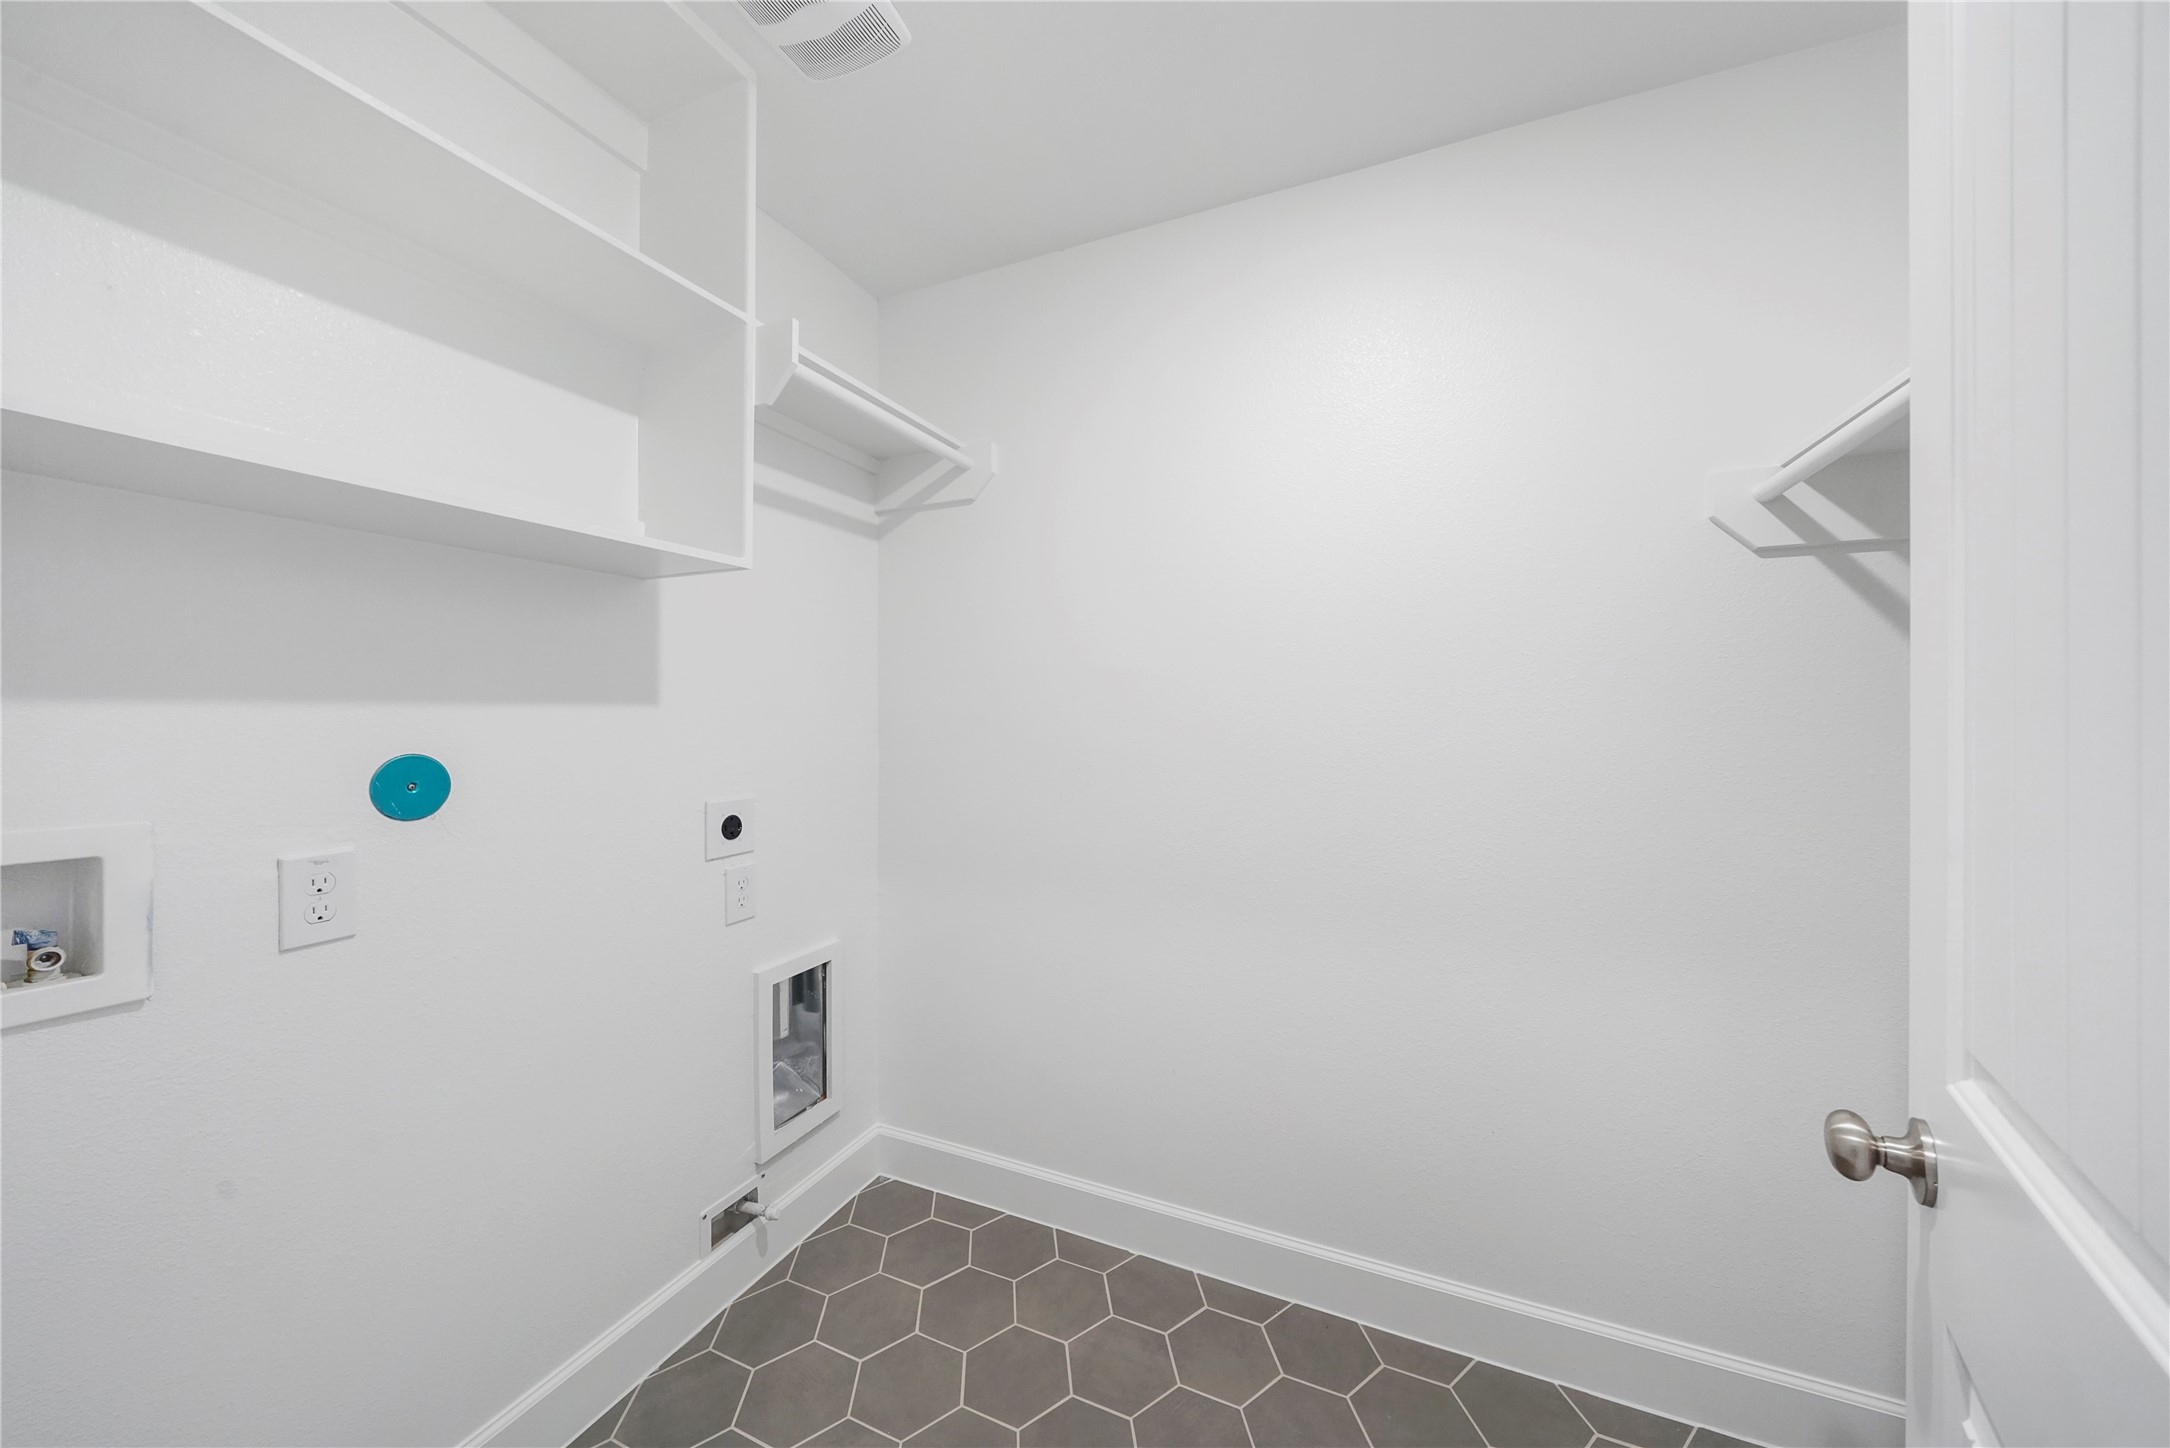 The Utility Room is located on the second floor, and features built-in shelves for additional storage. (Sample photos of a completed Bordeaux floor plan. The image may feature alternative selections and/or upgrades.)